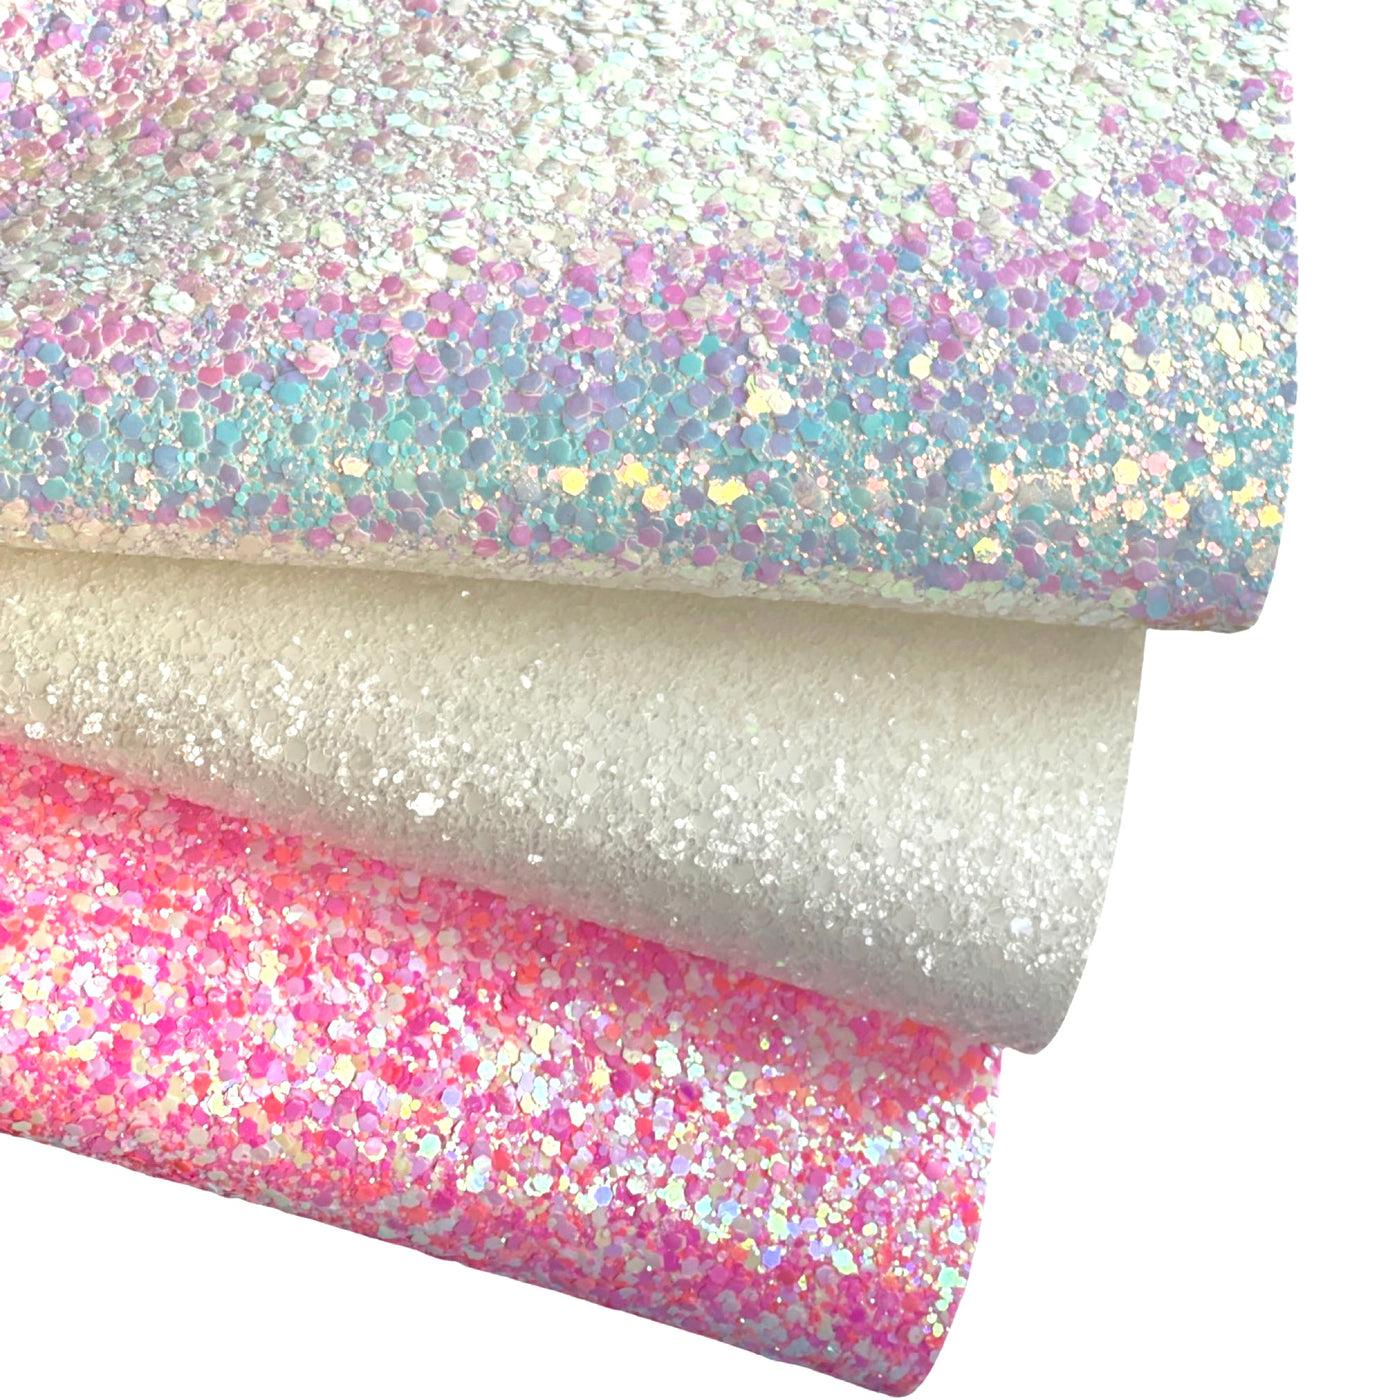 Lets go Party Pink Chunky Glitter Leather - Fluro Mix!